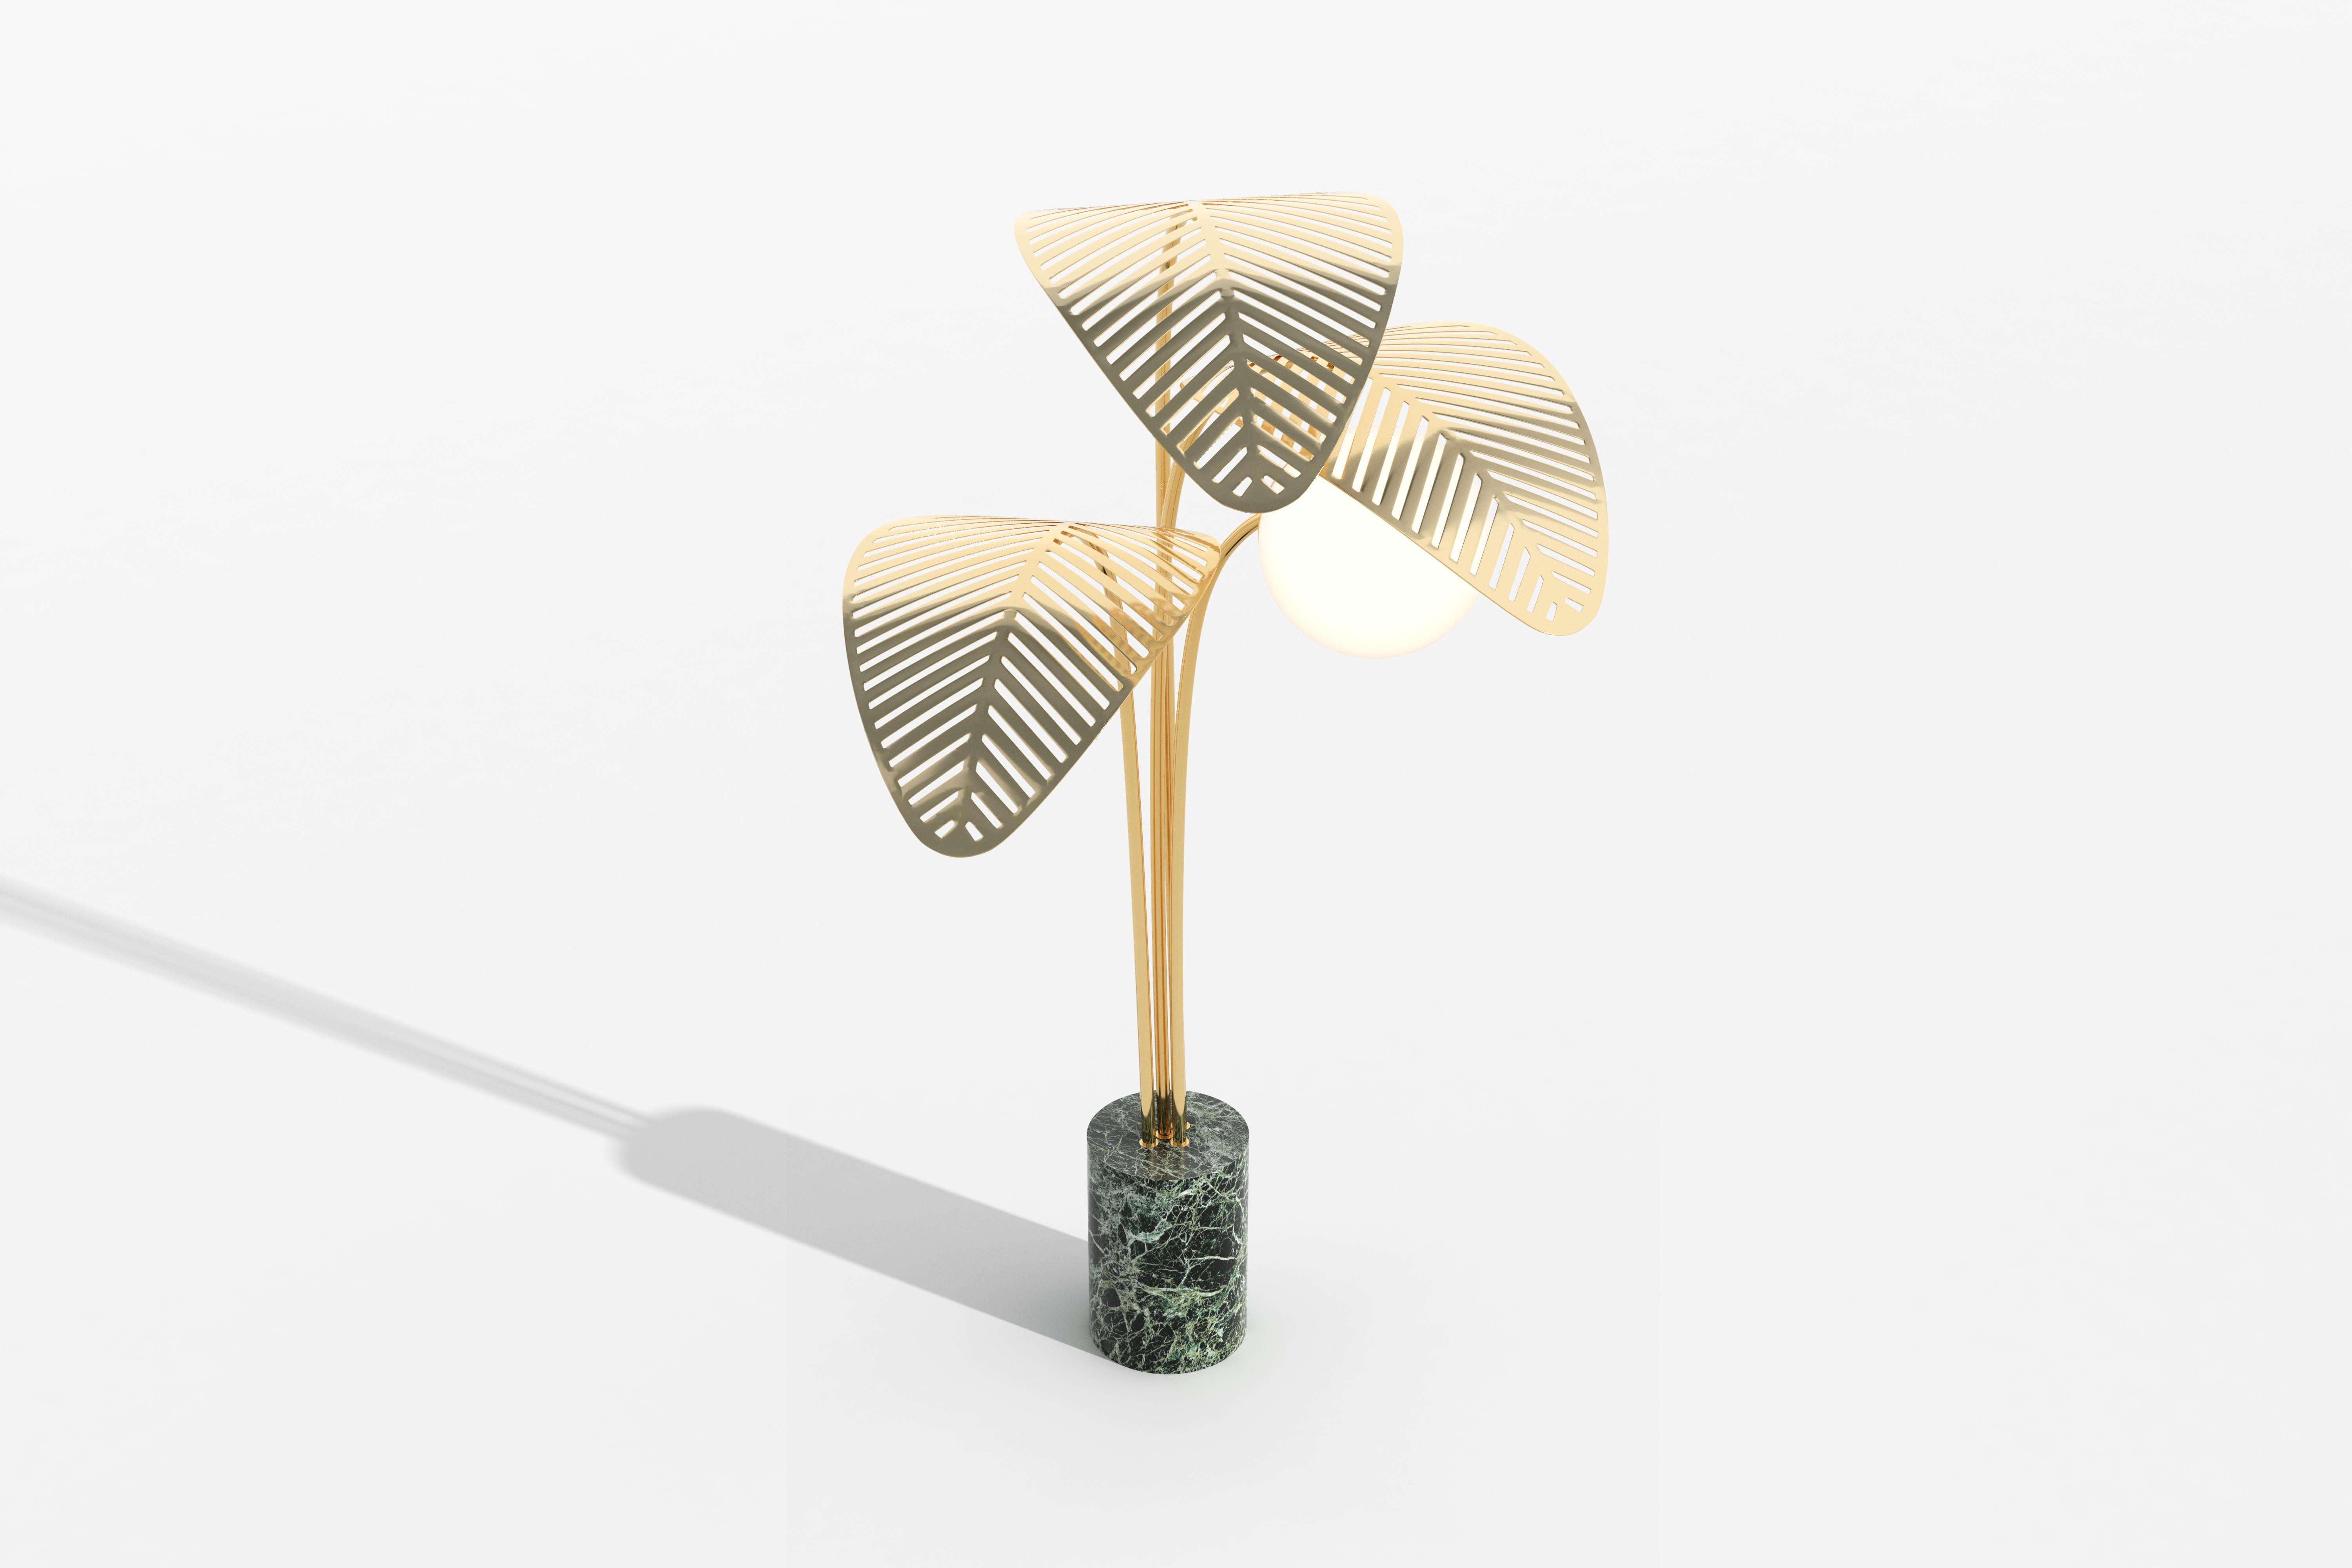 Le Refuge lamps are the natural evolution of Marc Ange's ever-popular Le Refuge day-bed. 

Floor lamp with Verde Alpi green marble base, and 3 giant palm leaves, die-cut in gold metal.
Frosted lamp shade and dimmable light.

Designed by